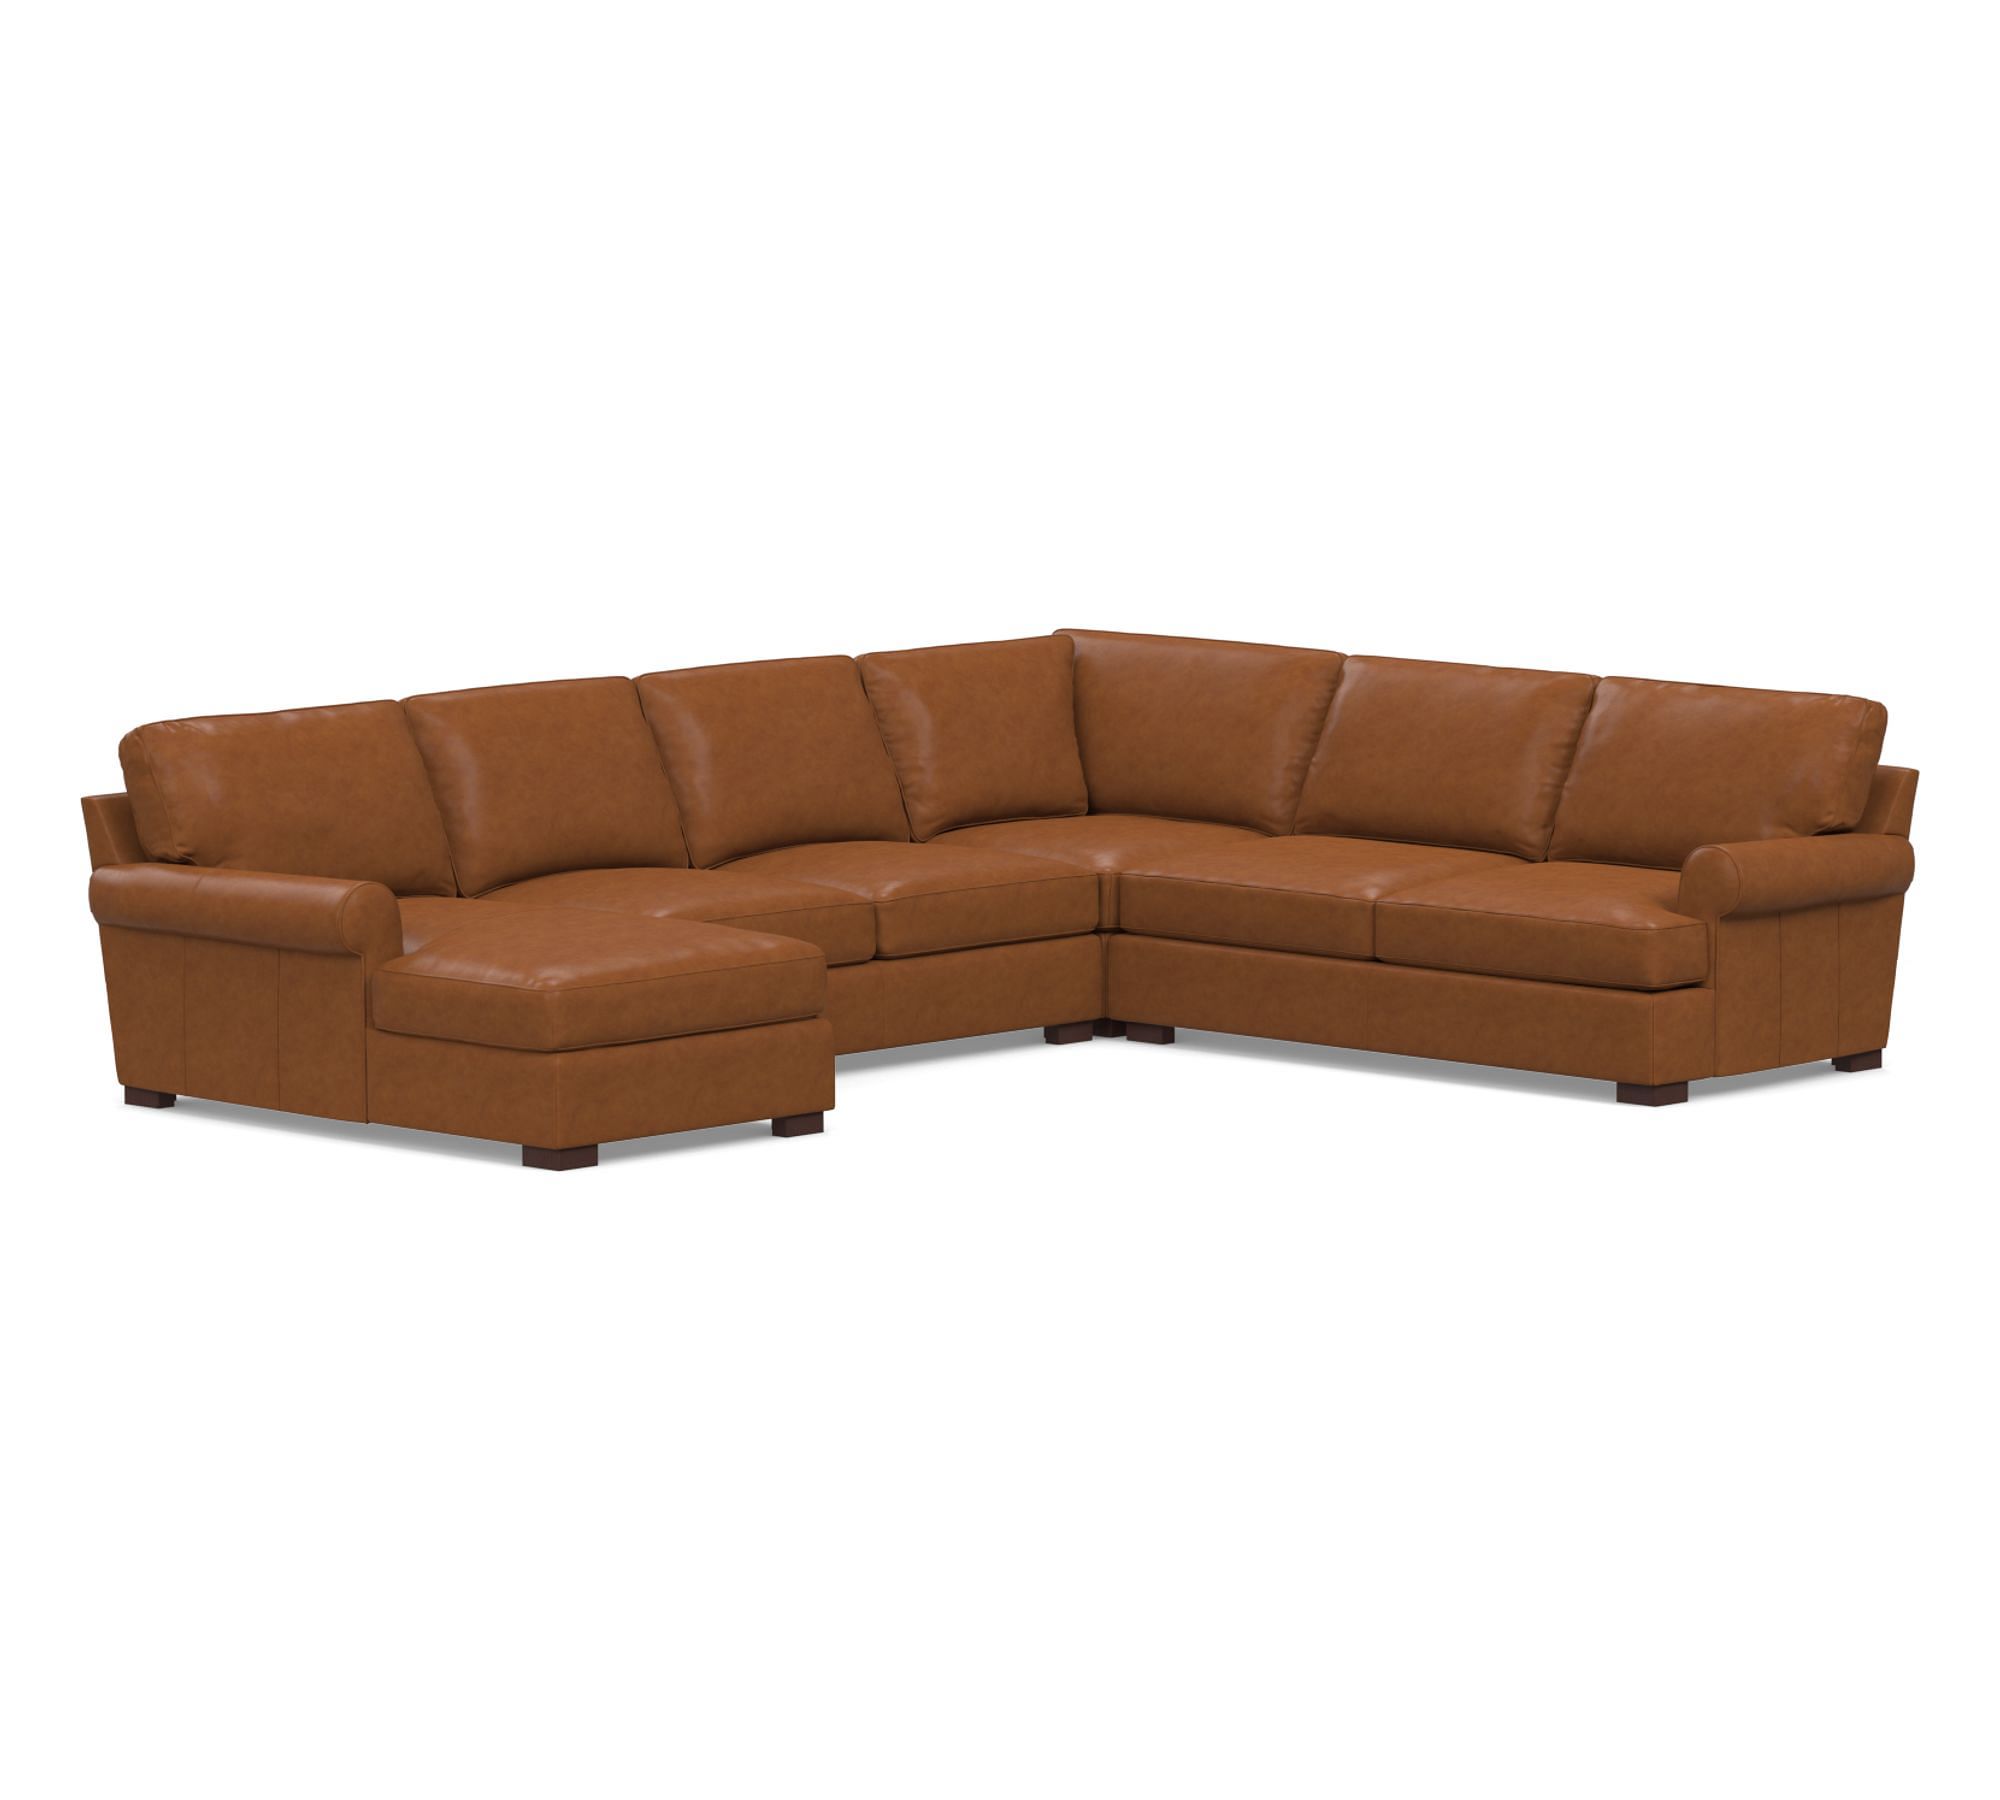 Townsend Roll Arm Leather 4-Piece Chaise Sectional (143")